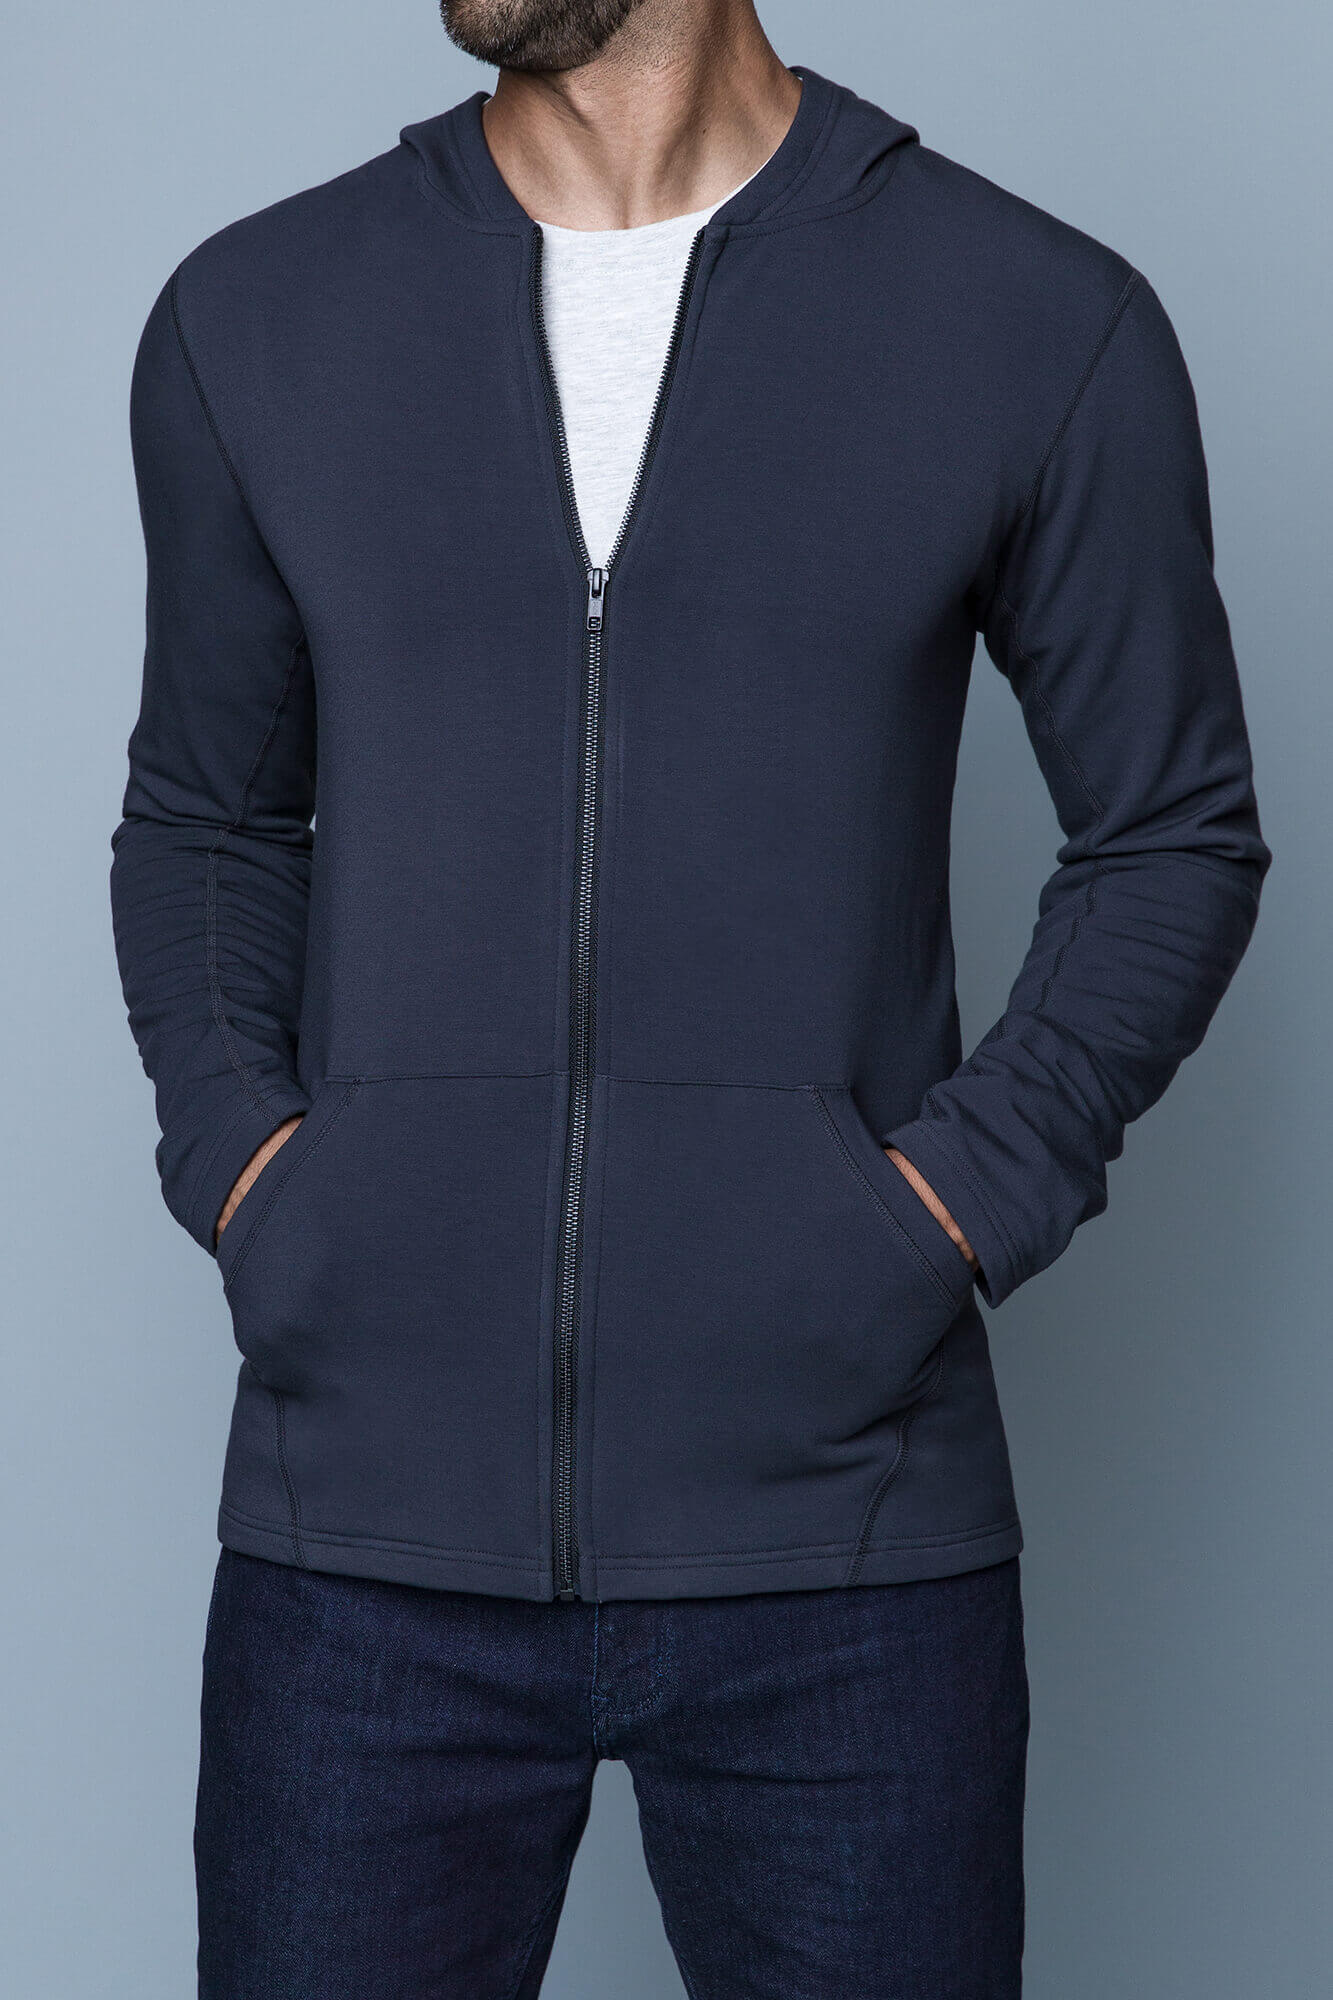 The Navas Lab Hawkins tall hoodie in vivid grey. The perfect tall slim hoodie for tall and slim guys looking for style and comfort. Tall skinny guy sweater hoodie in grey.